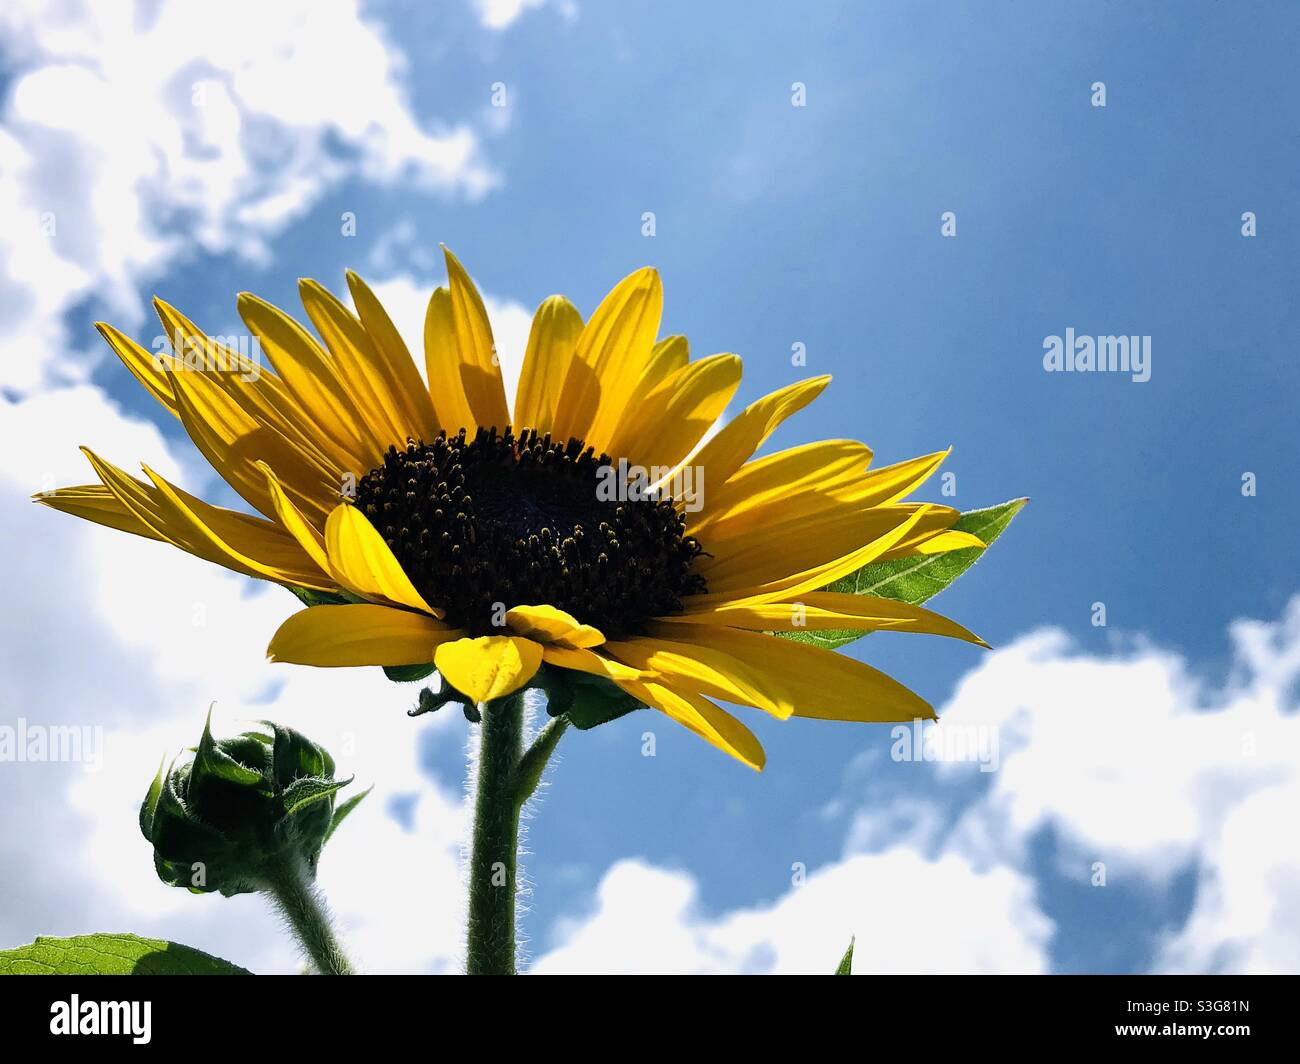 Sunflower against a blue sky with clouds Stock Photo